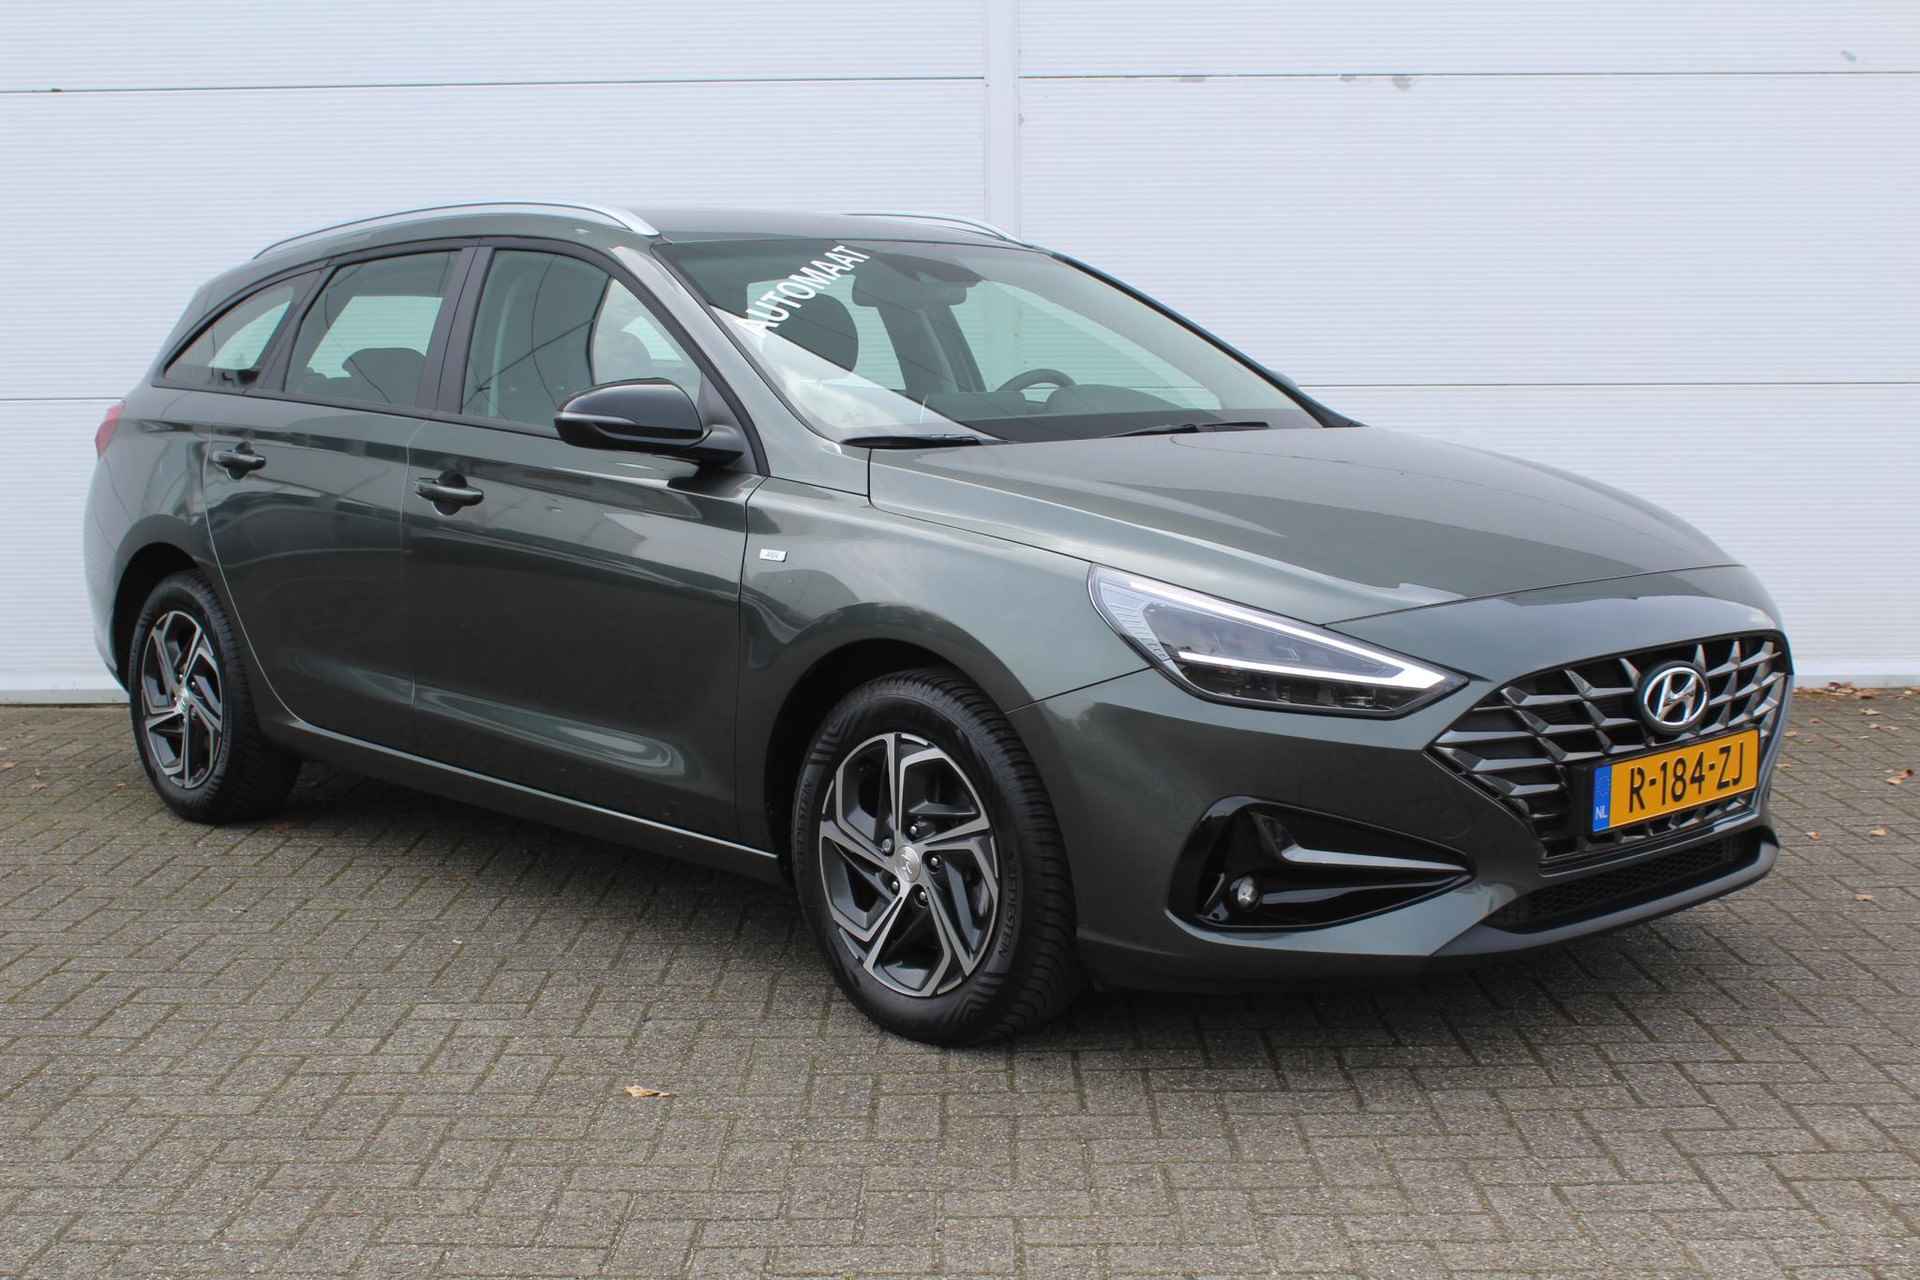 Hyundai i30 Wagon 1.0 T-GDi MHEV Comfort Smart AUTOMAAT / Navigatie + Apple Carplay/Android Auto / Cruise Control / Achteruitrijcamera / Climate Control / Keyless Entry & Start / - 18/43